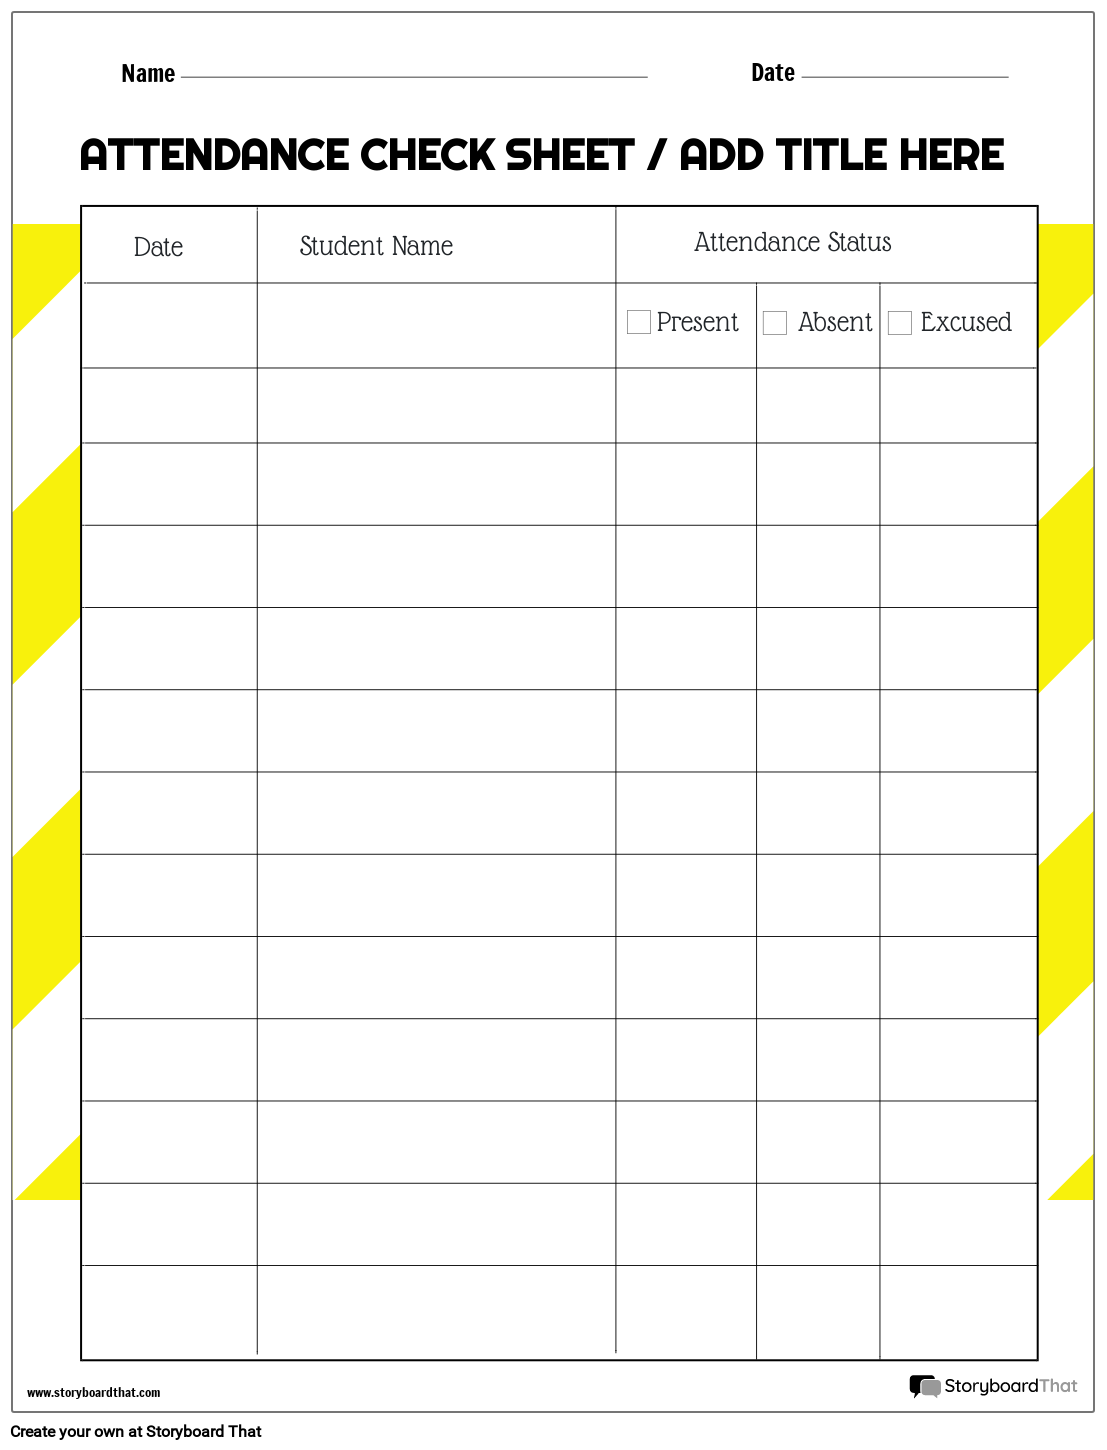 Table Worksheet Design with Yellow Background Stripes